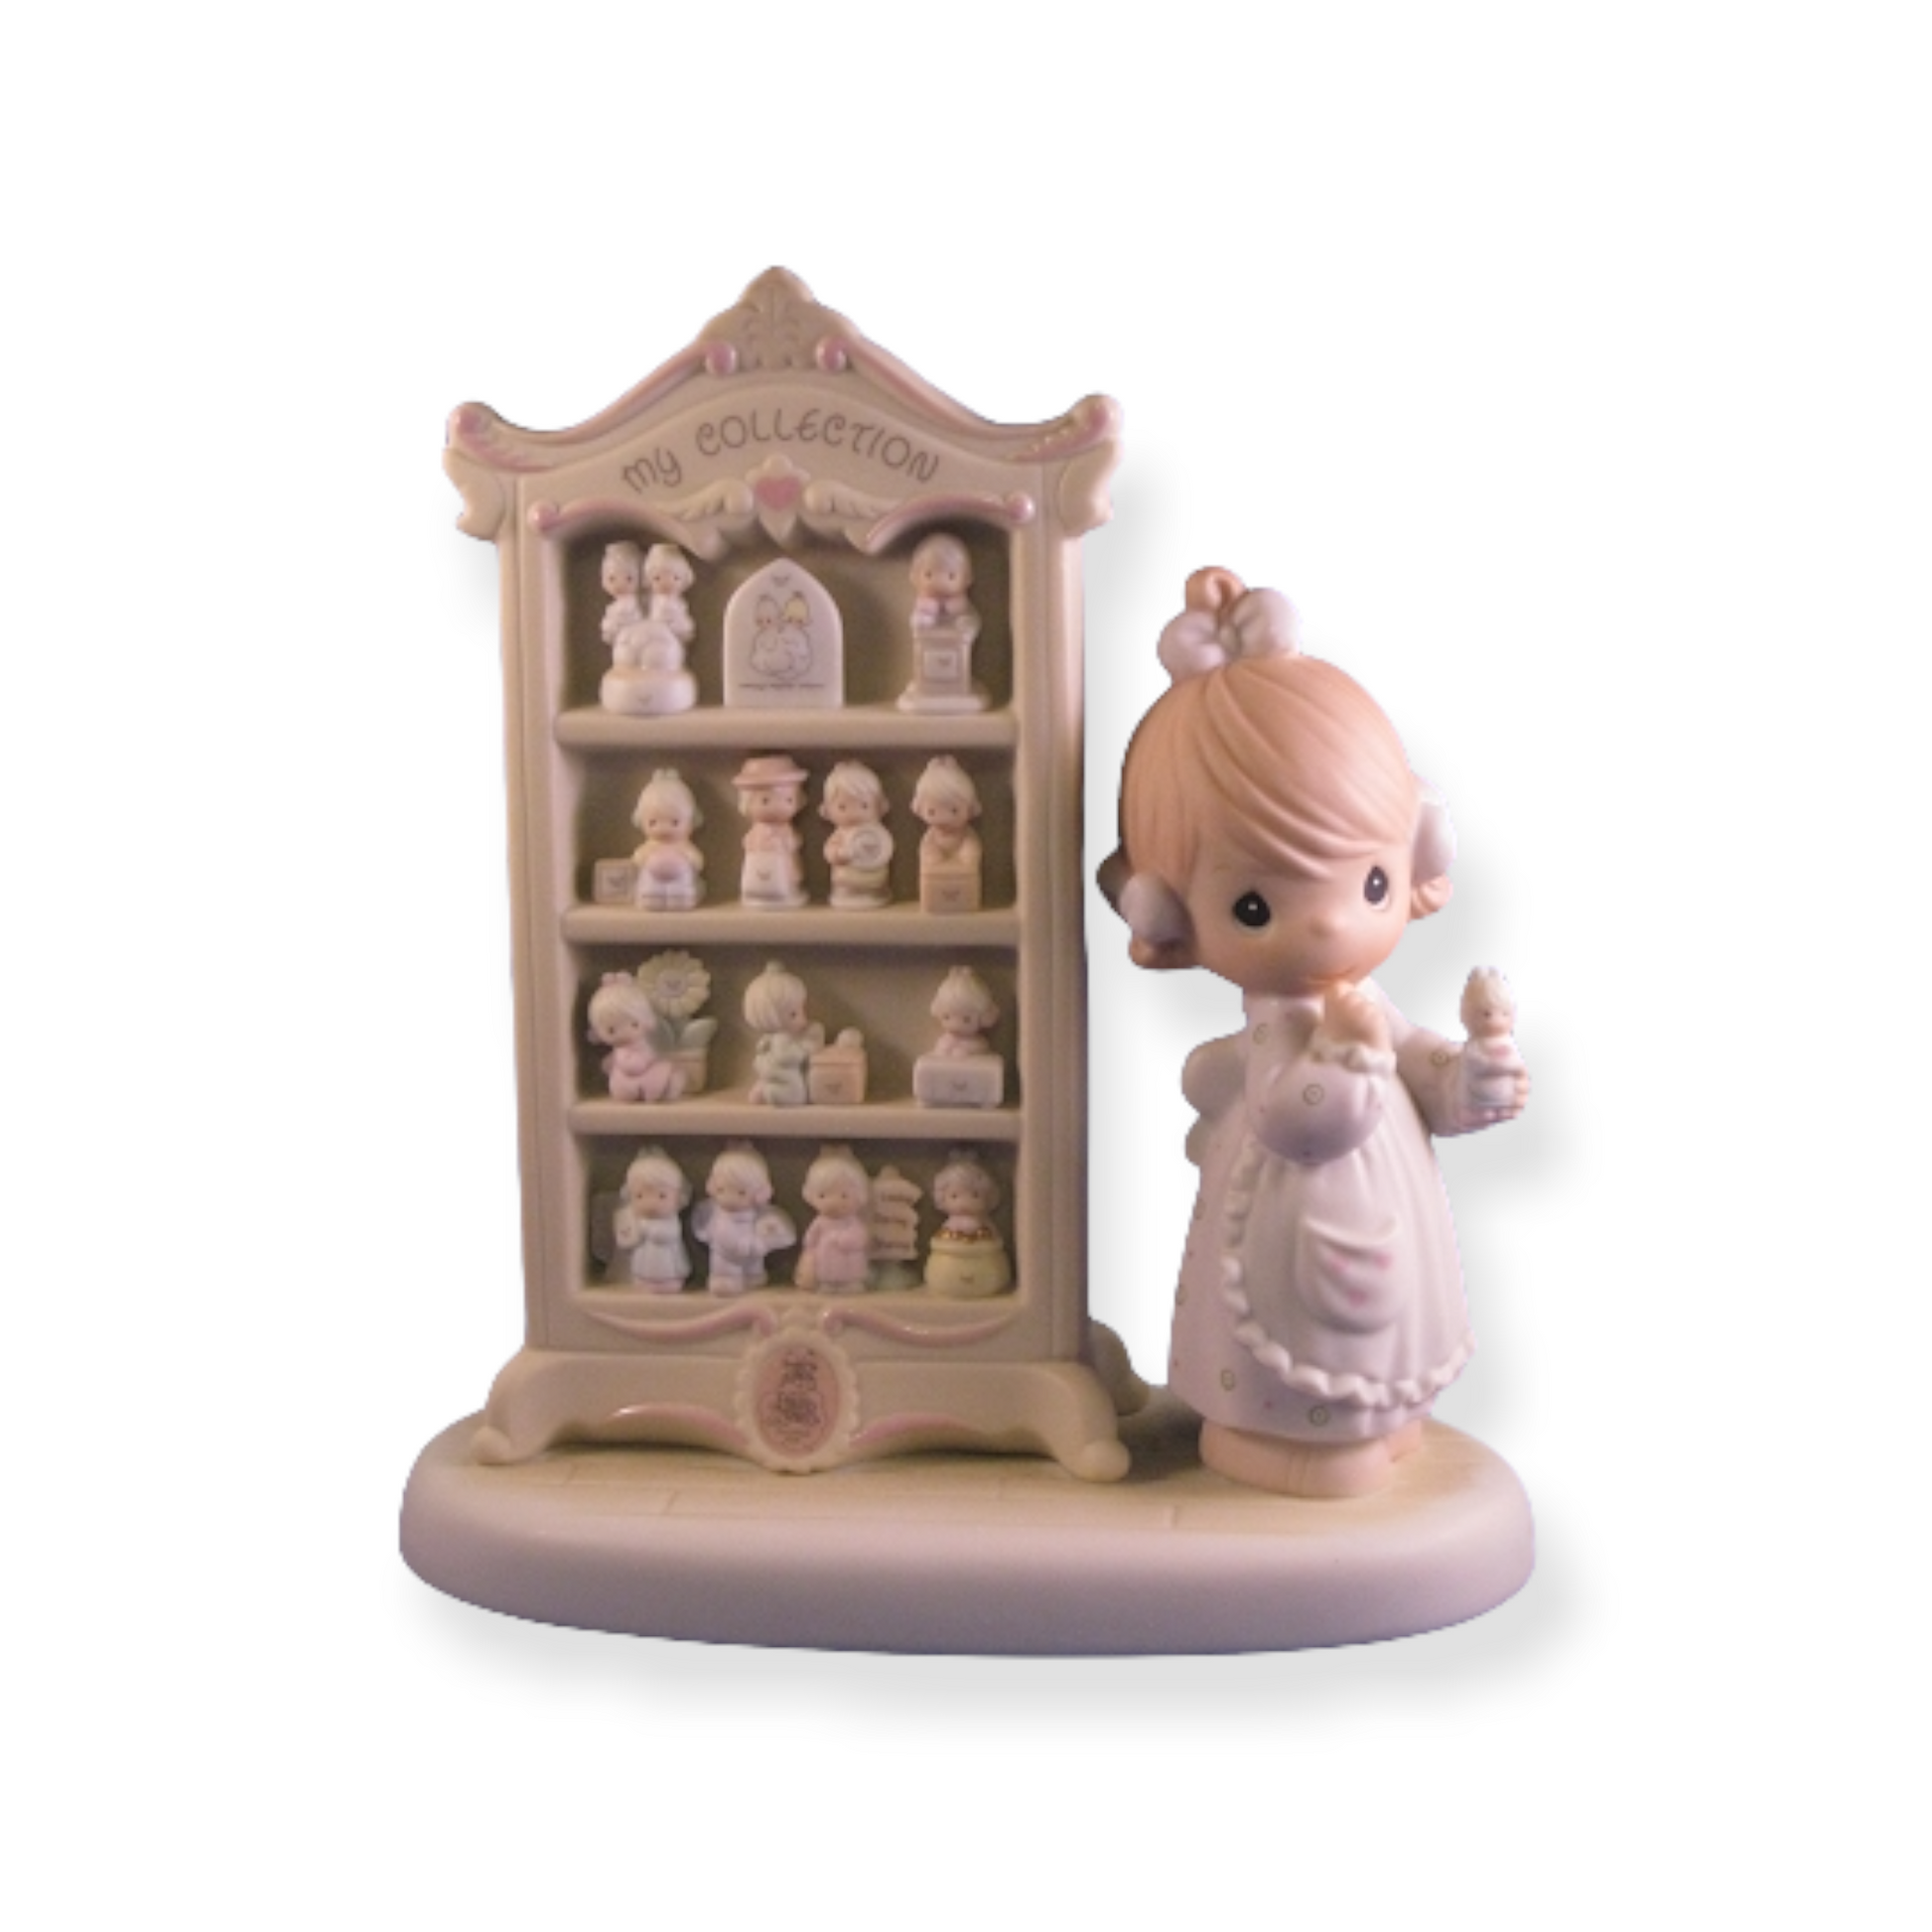 A Perfect Display Of 15 Happy Years - Precious Moment Figurine